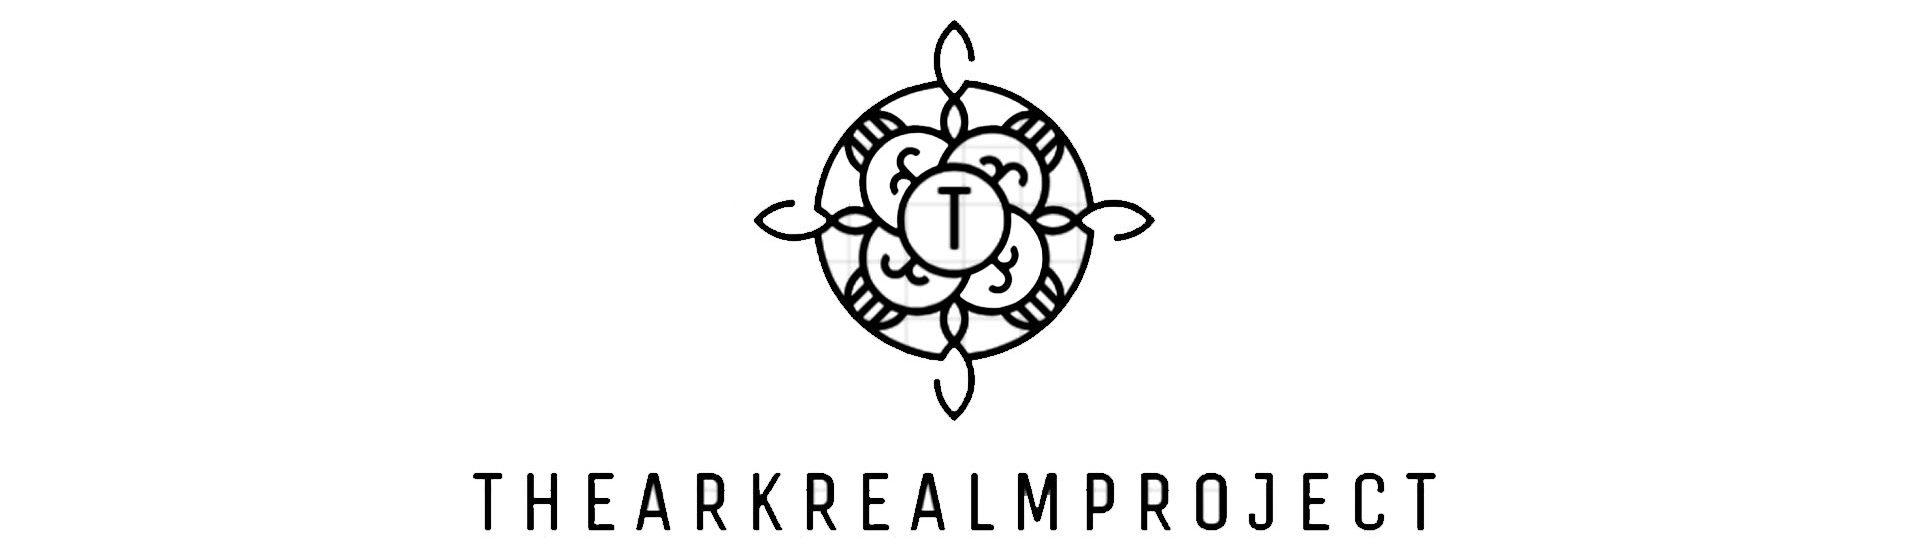 Theark Realm Project